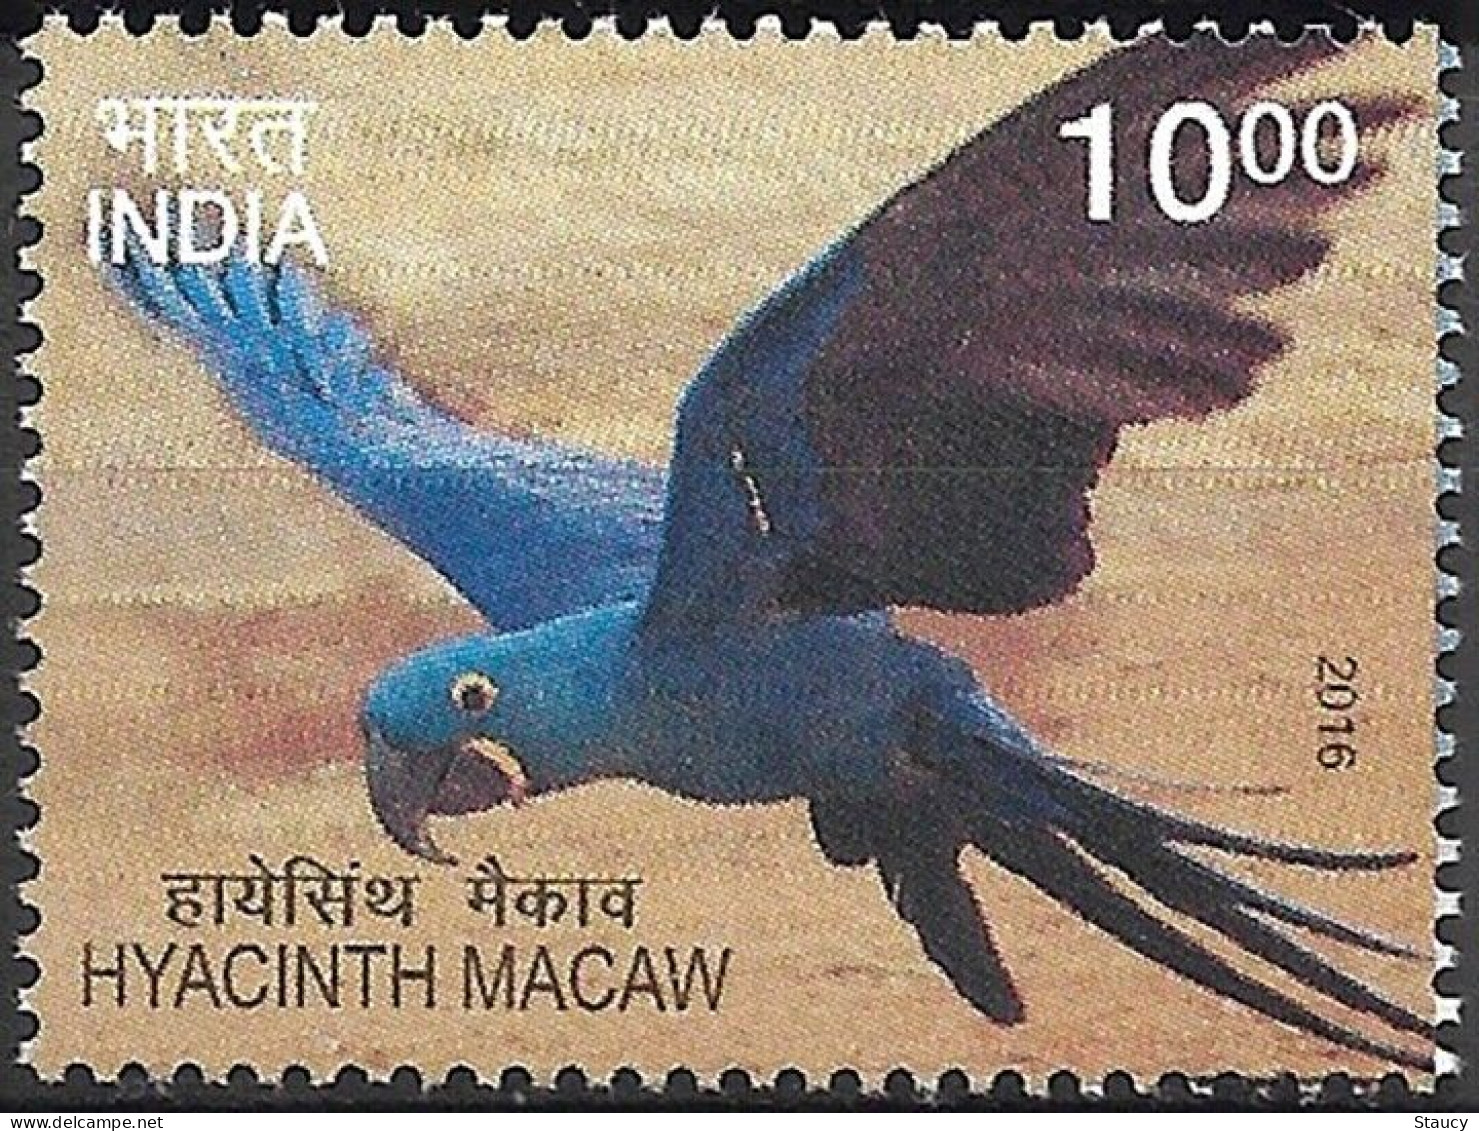 India 2016 Exotic Birds 1v Stamp MNH Macaw Parrot Amazon Crested, HYACINTH MACAW As Per Scan - Unused Stamps